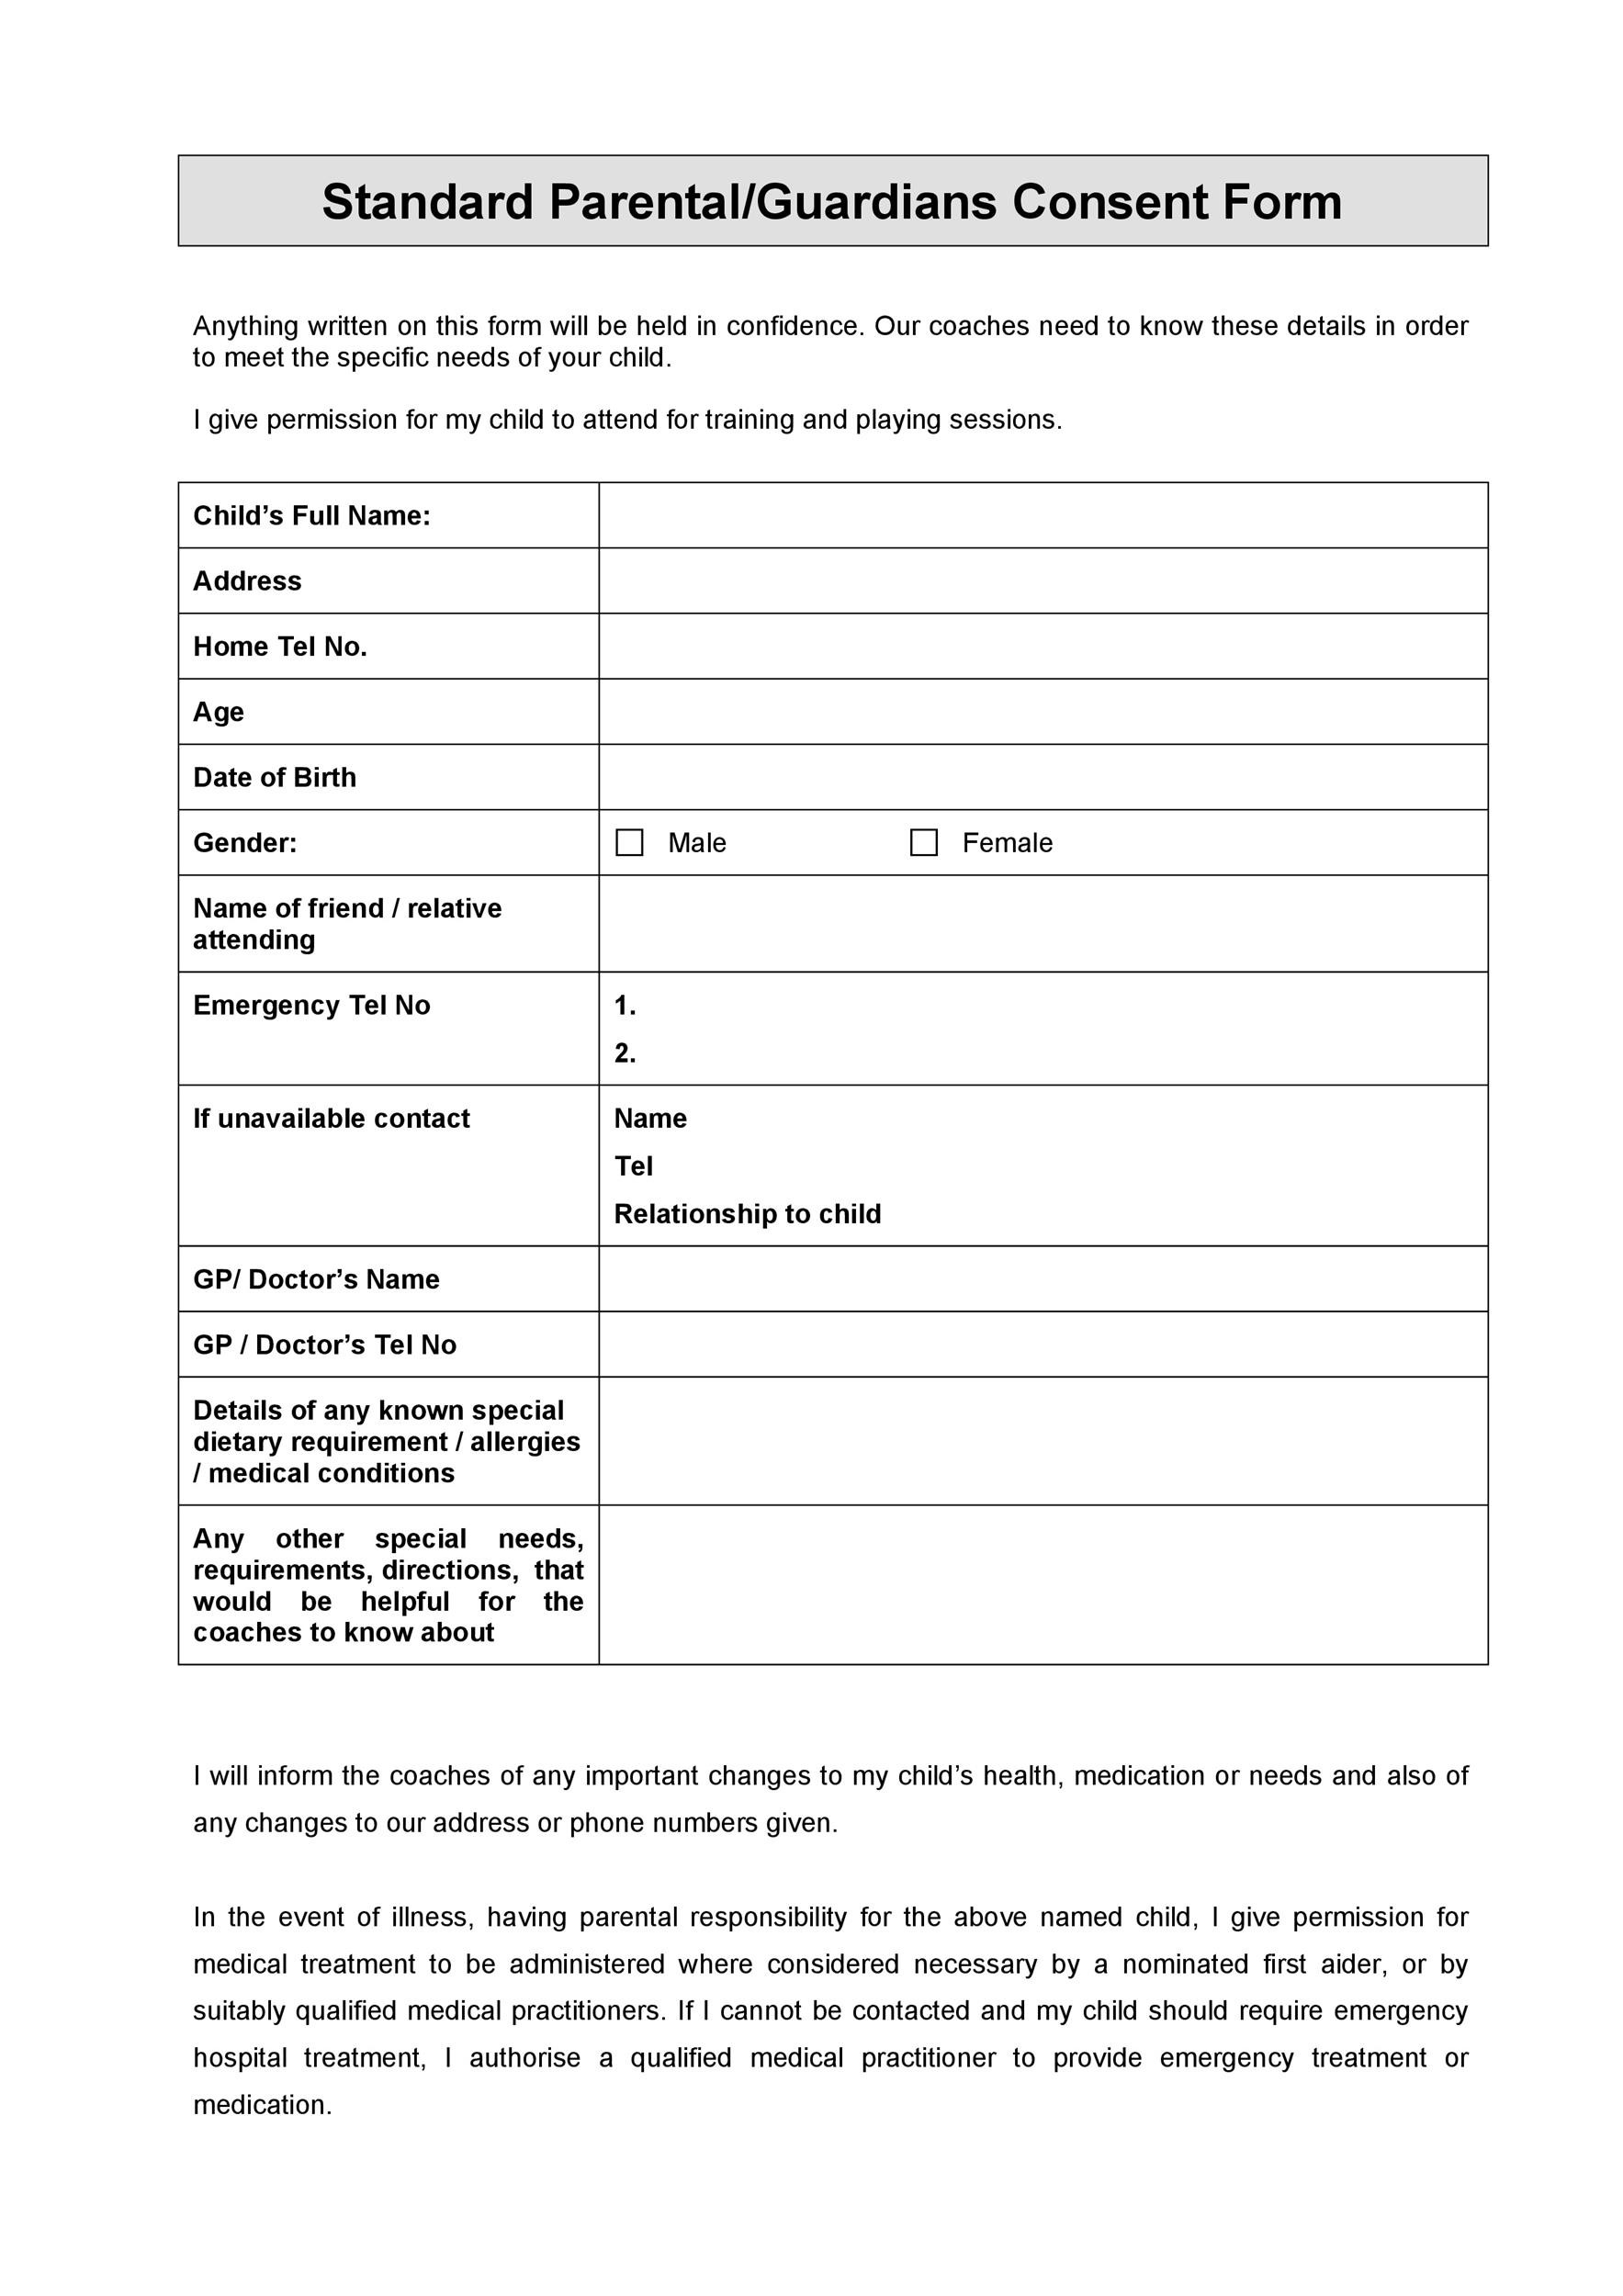 Free parental consent form template 14